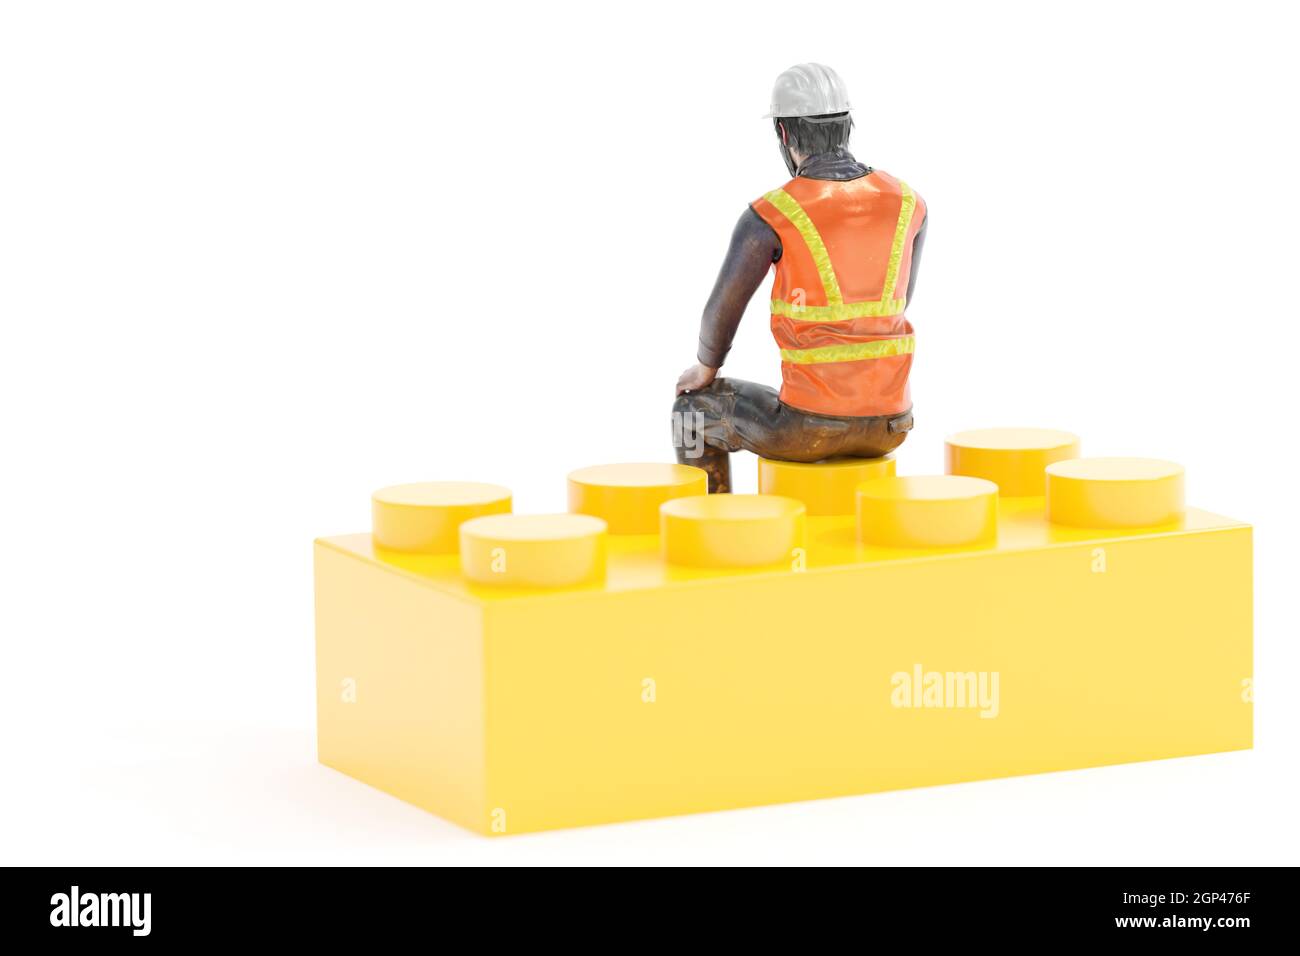 Miniature worker with safety gear sitting on yellow toy brick against white background Stock Photo